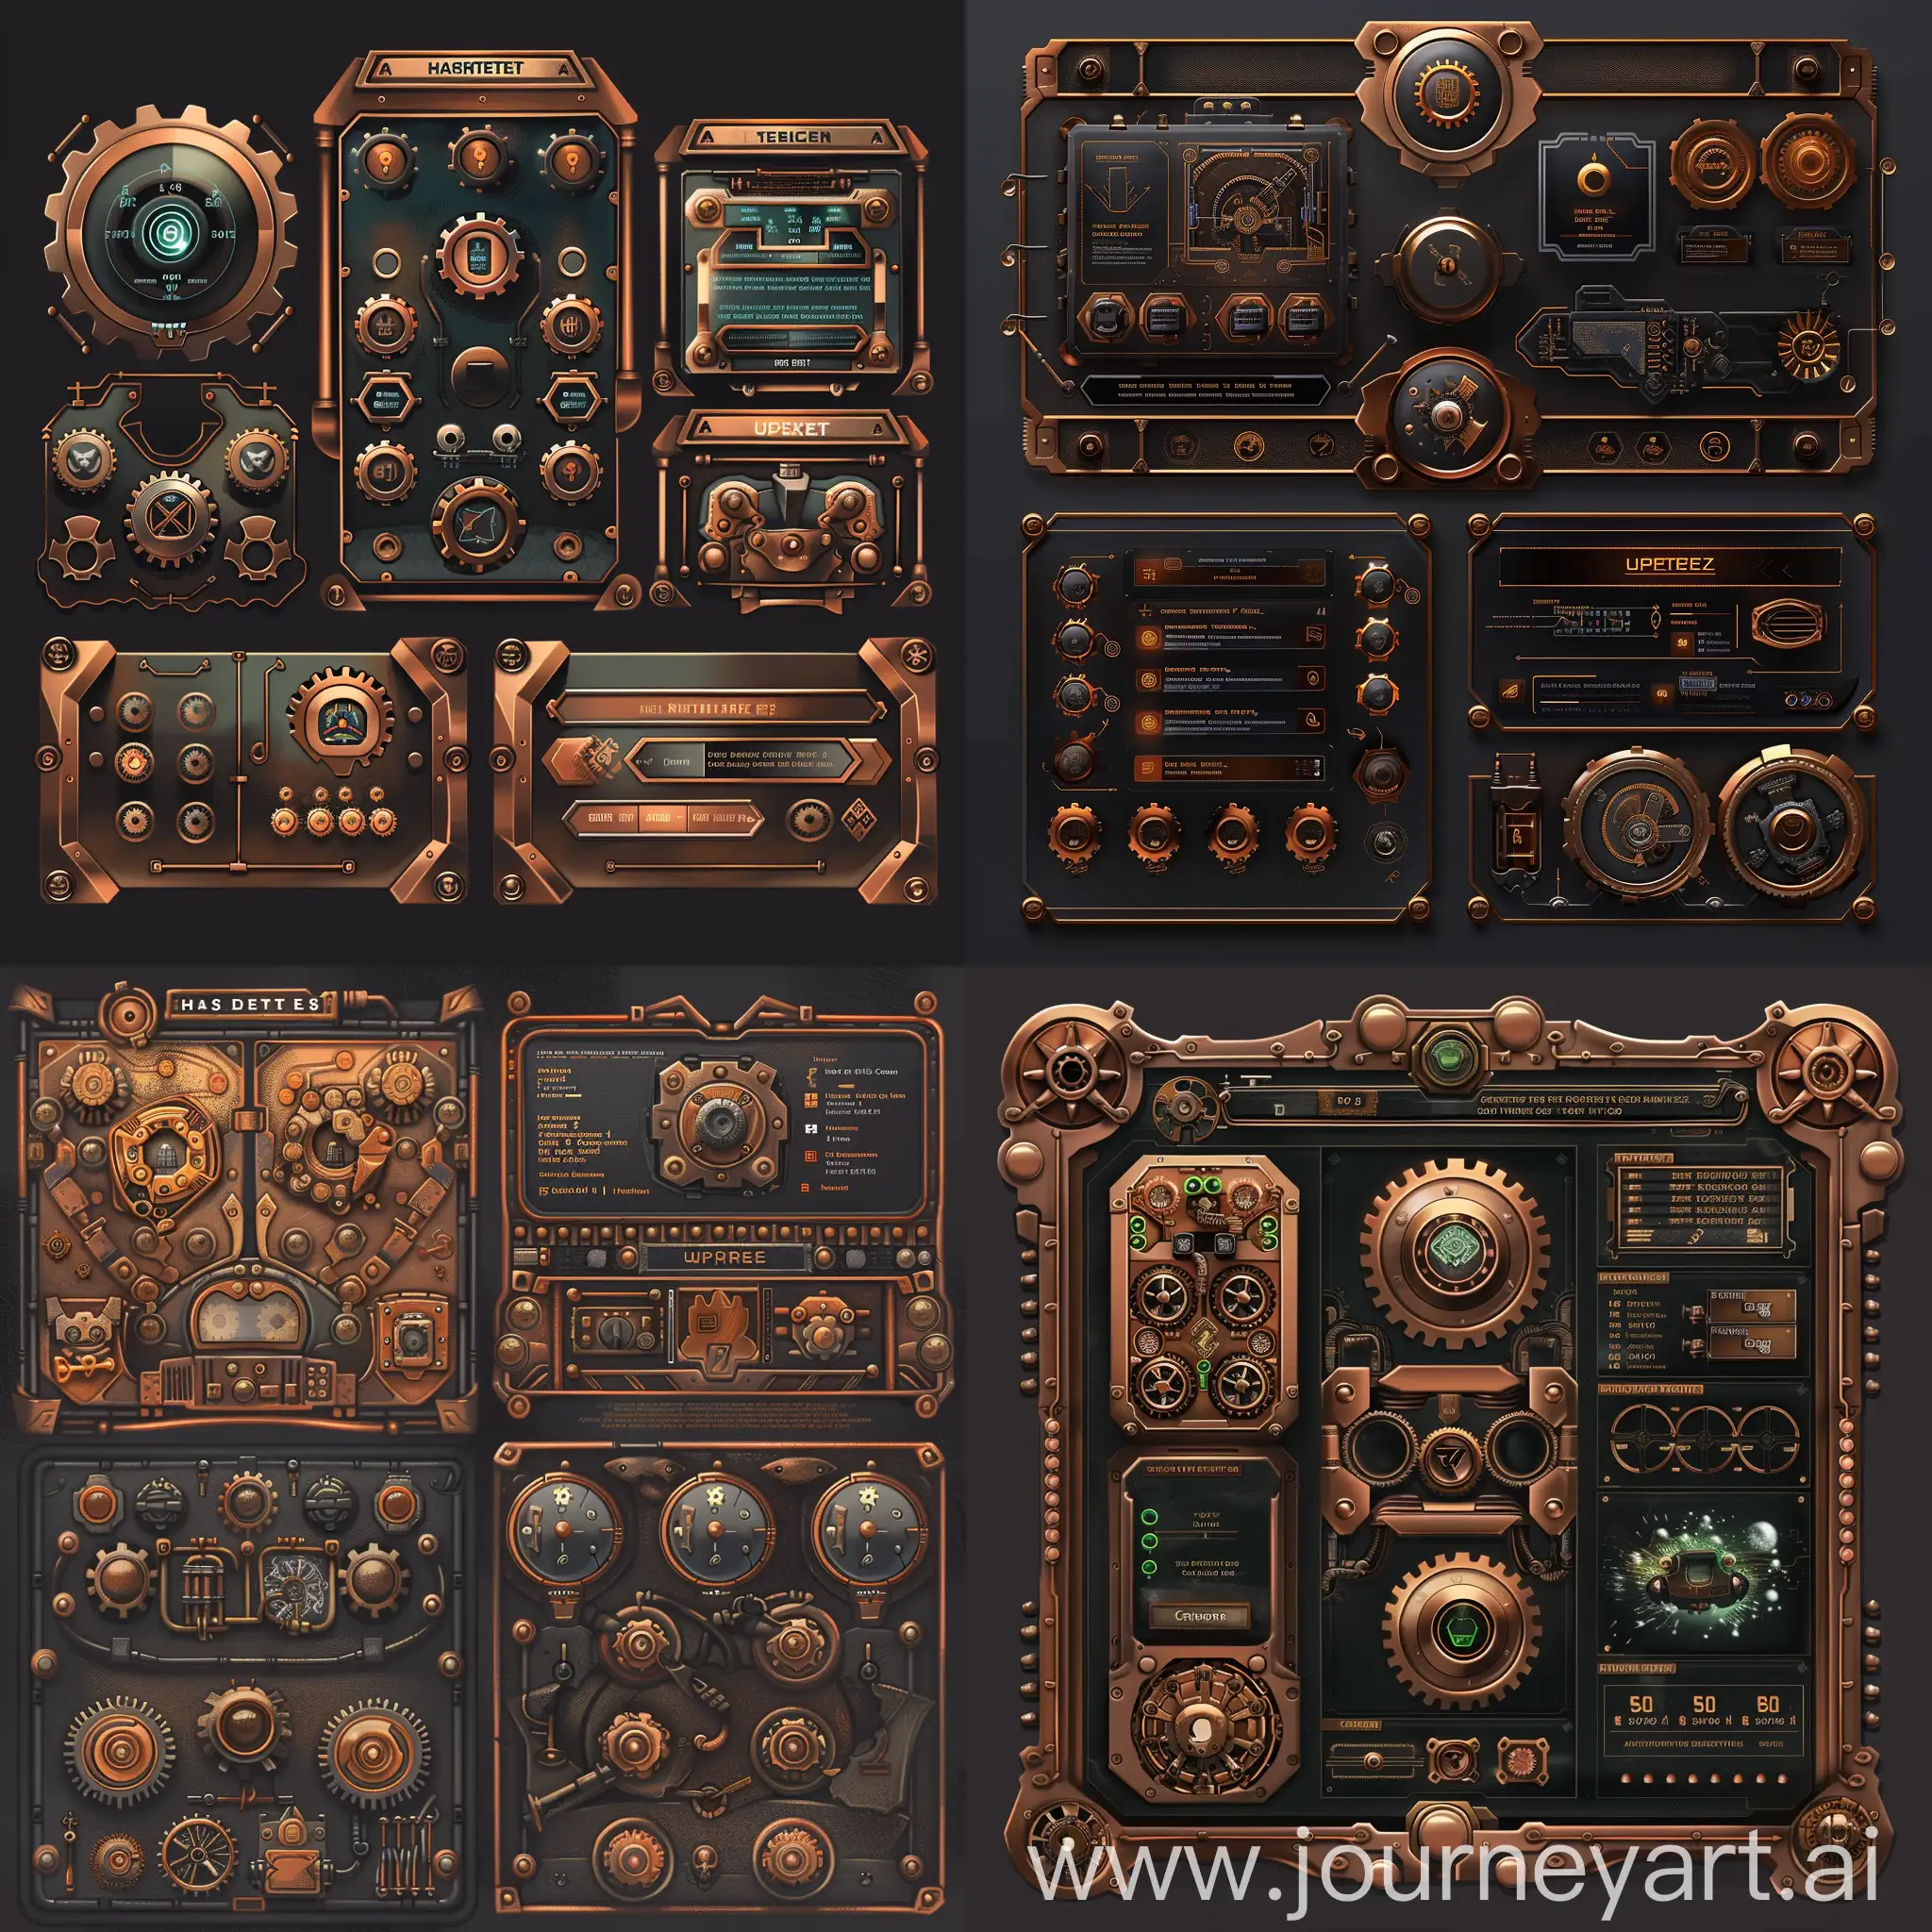 SteampunkRetro-Robot-Control-Interface-with-Gear-Icons-and-Copper-Panels